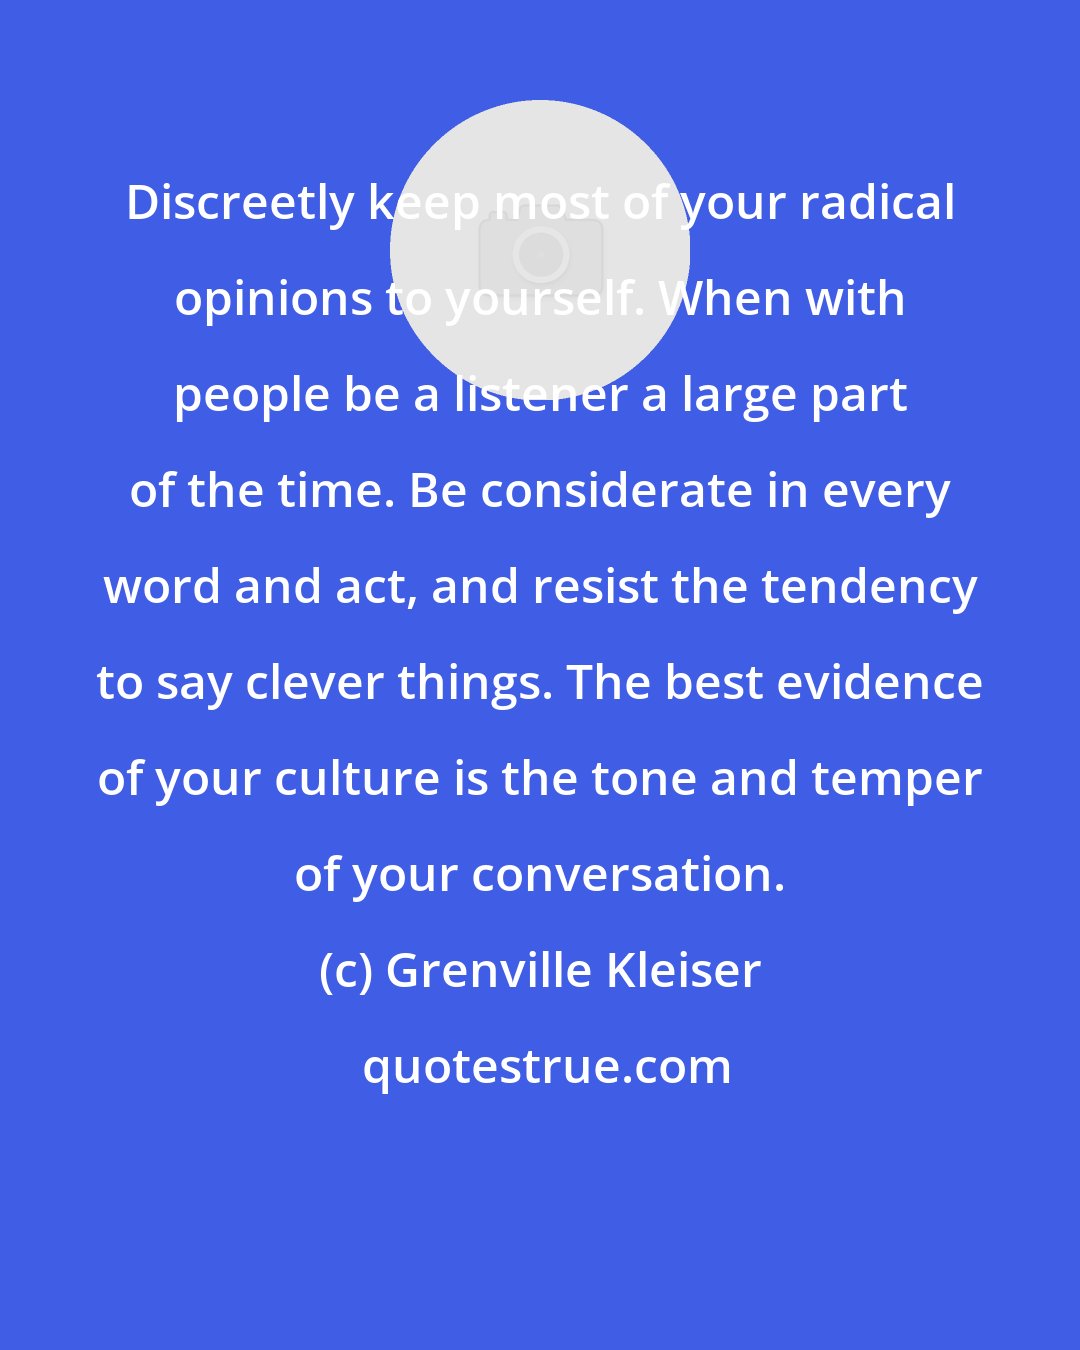 Grenville Kleiser: Discreetly keep most of your radical opinions to yourself. When with people be a listener a large part of the time. Be considerate in every word and act, and resist the tendency to say clever things. The best evidence of your culture is the tone and temper of your conversation.